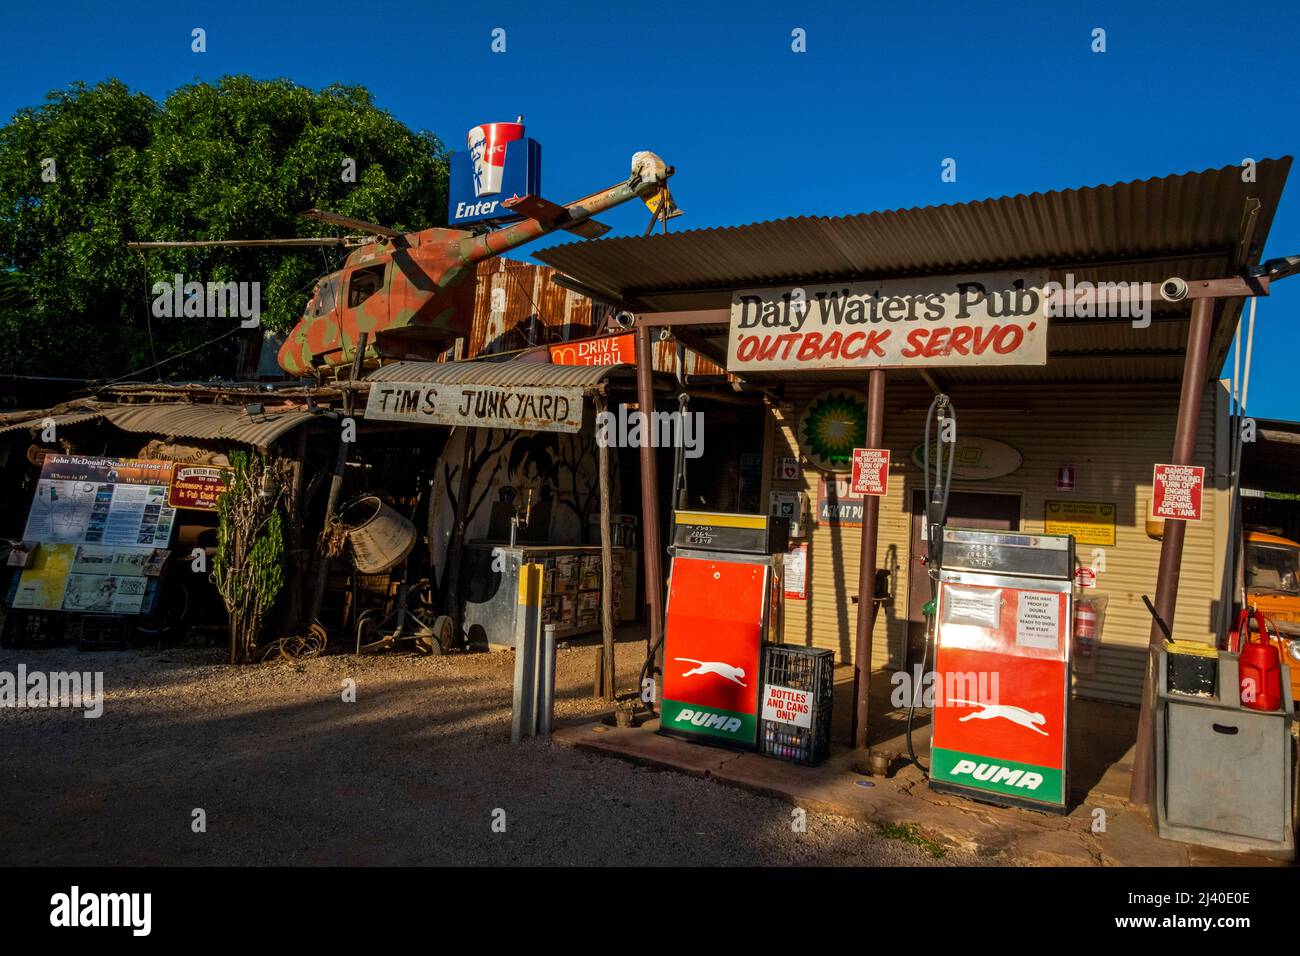 Daly Waters service station, Stuart Highway, Northern Territory, Australia Stock Photo